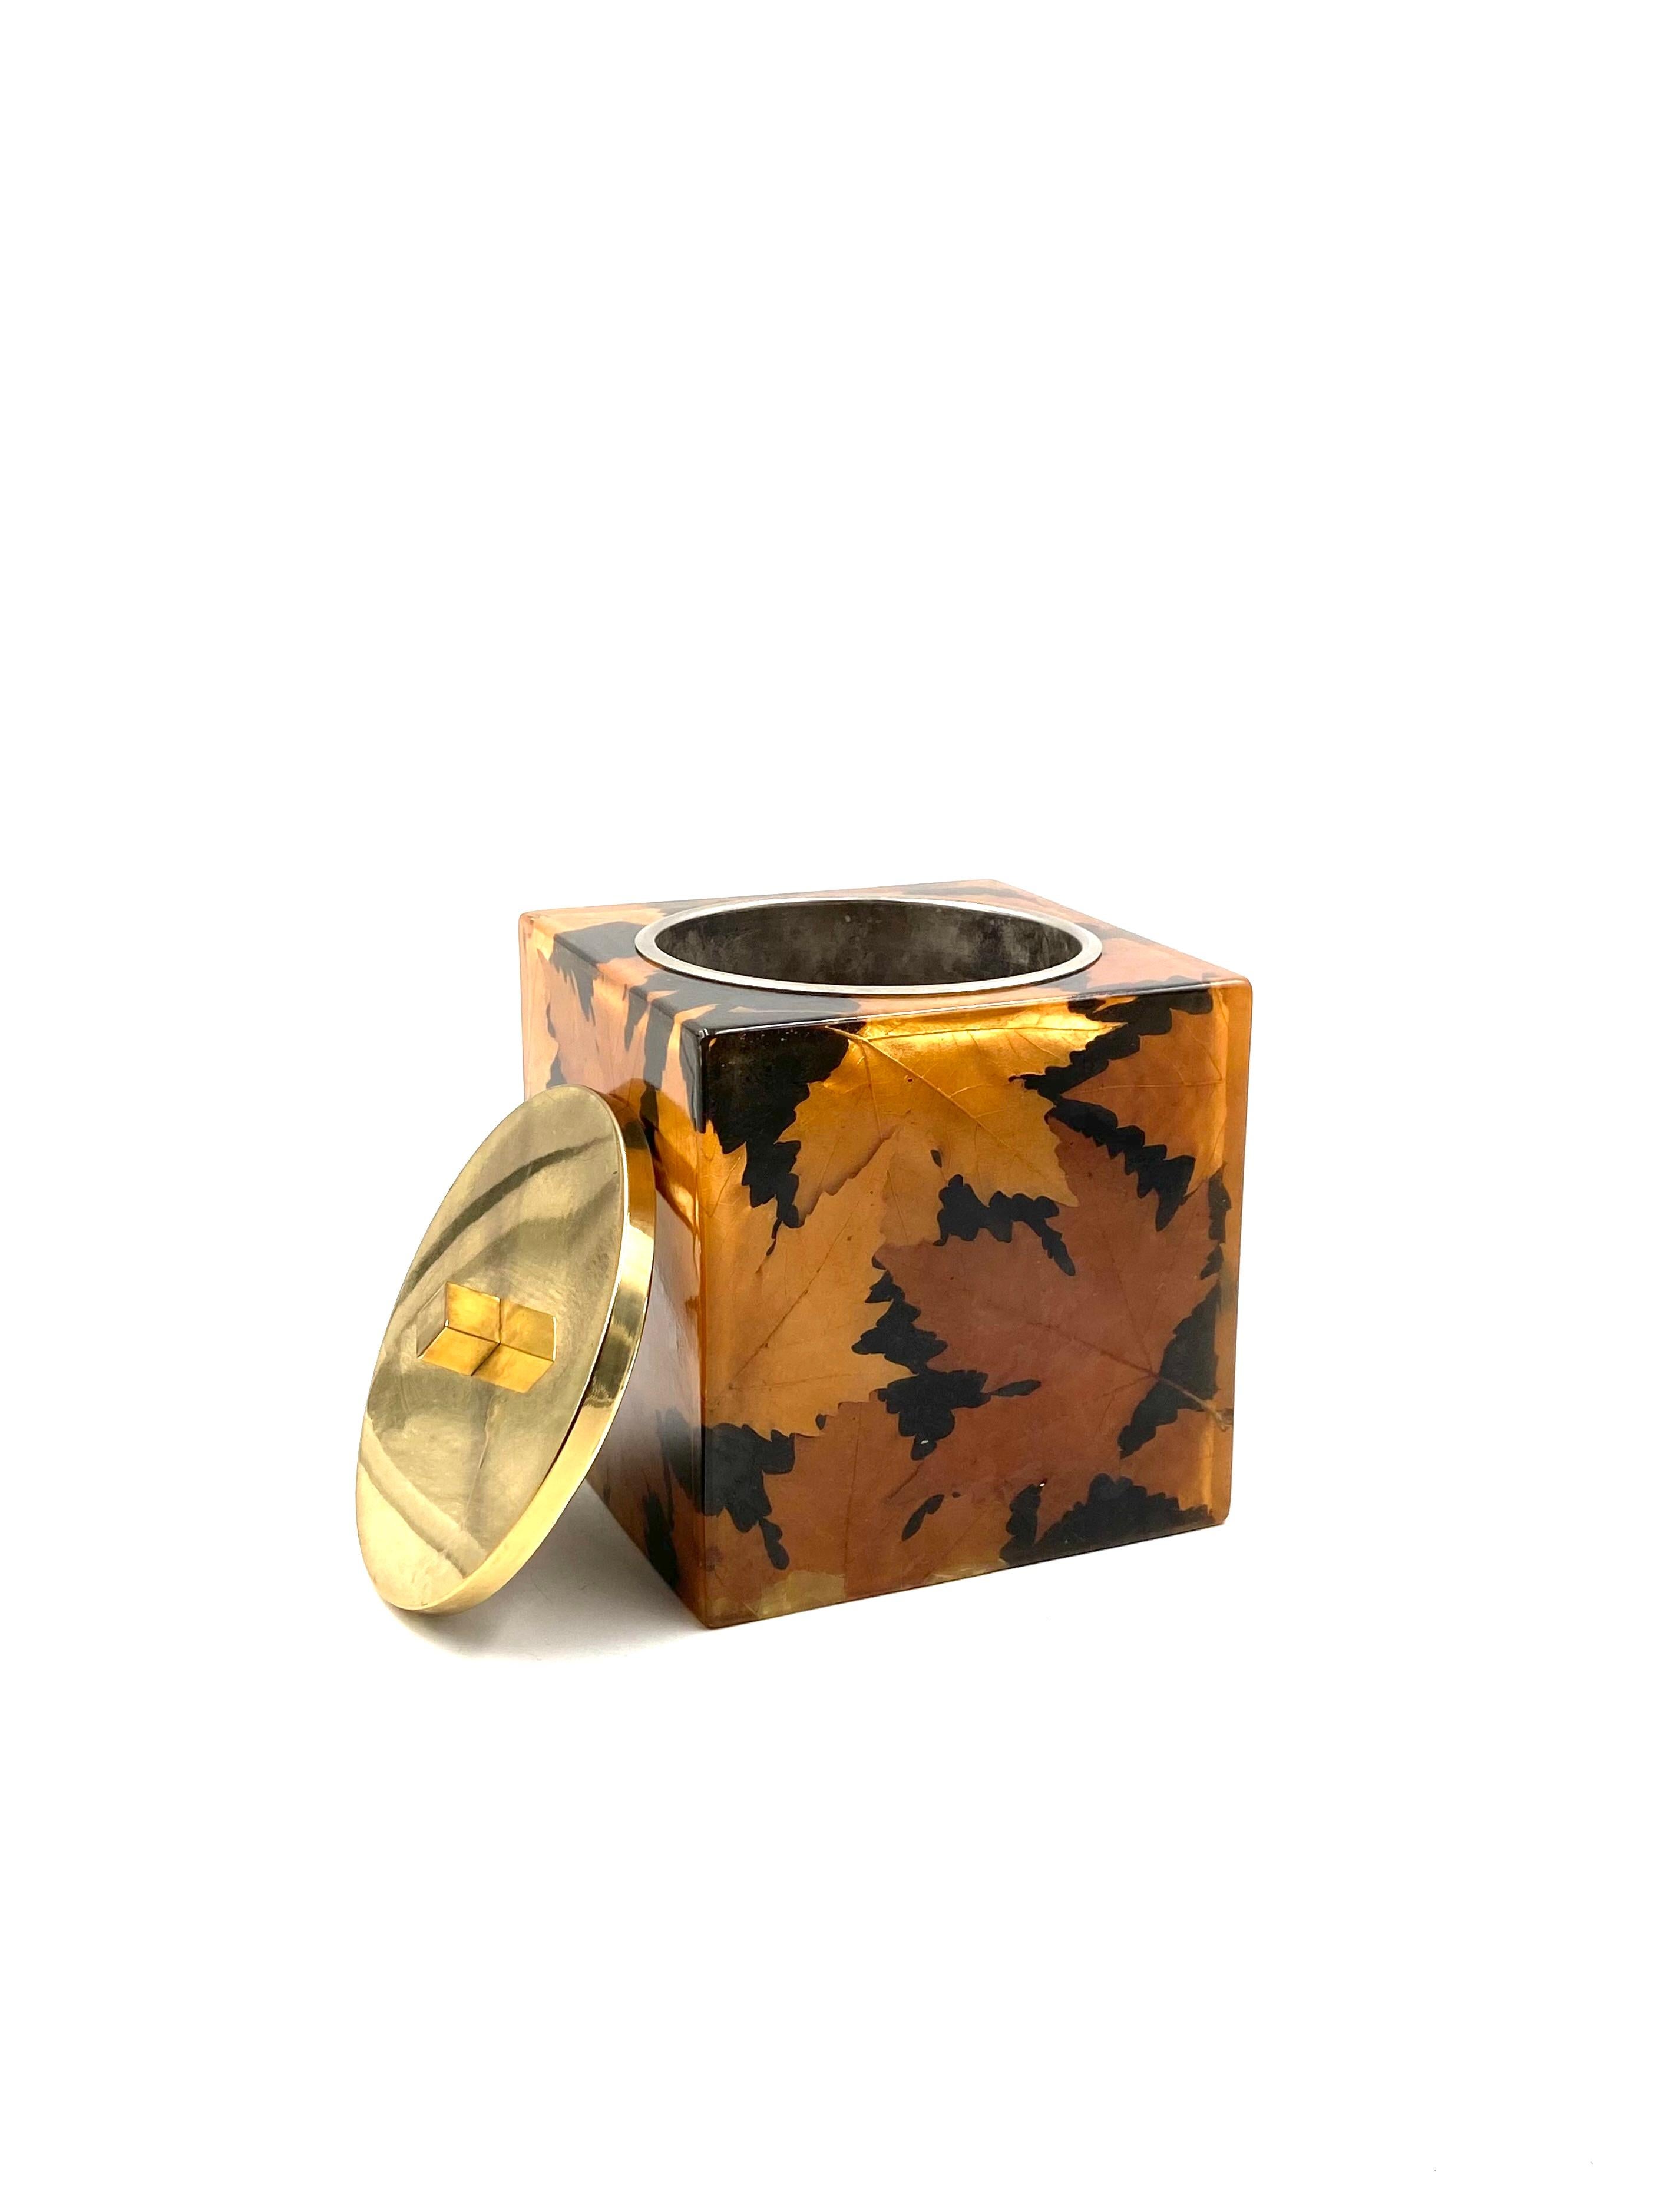 Hollywood regency brass and leaves resin ice bucket, Montagnani Florence 1970s For Sale 11